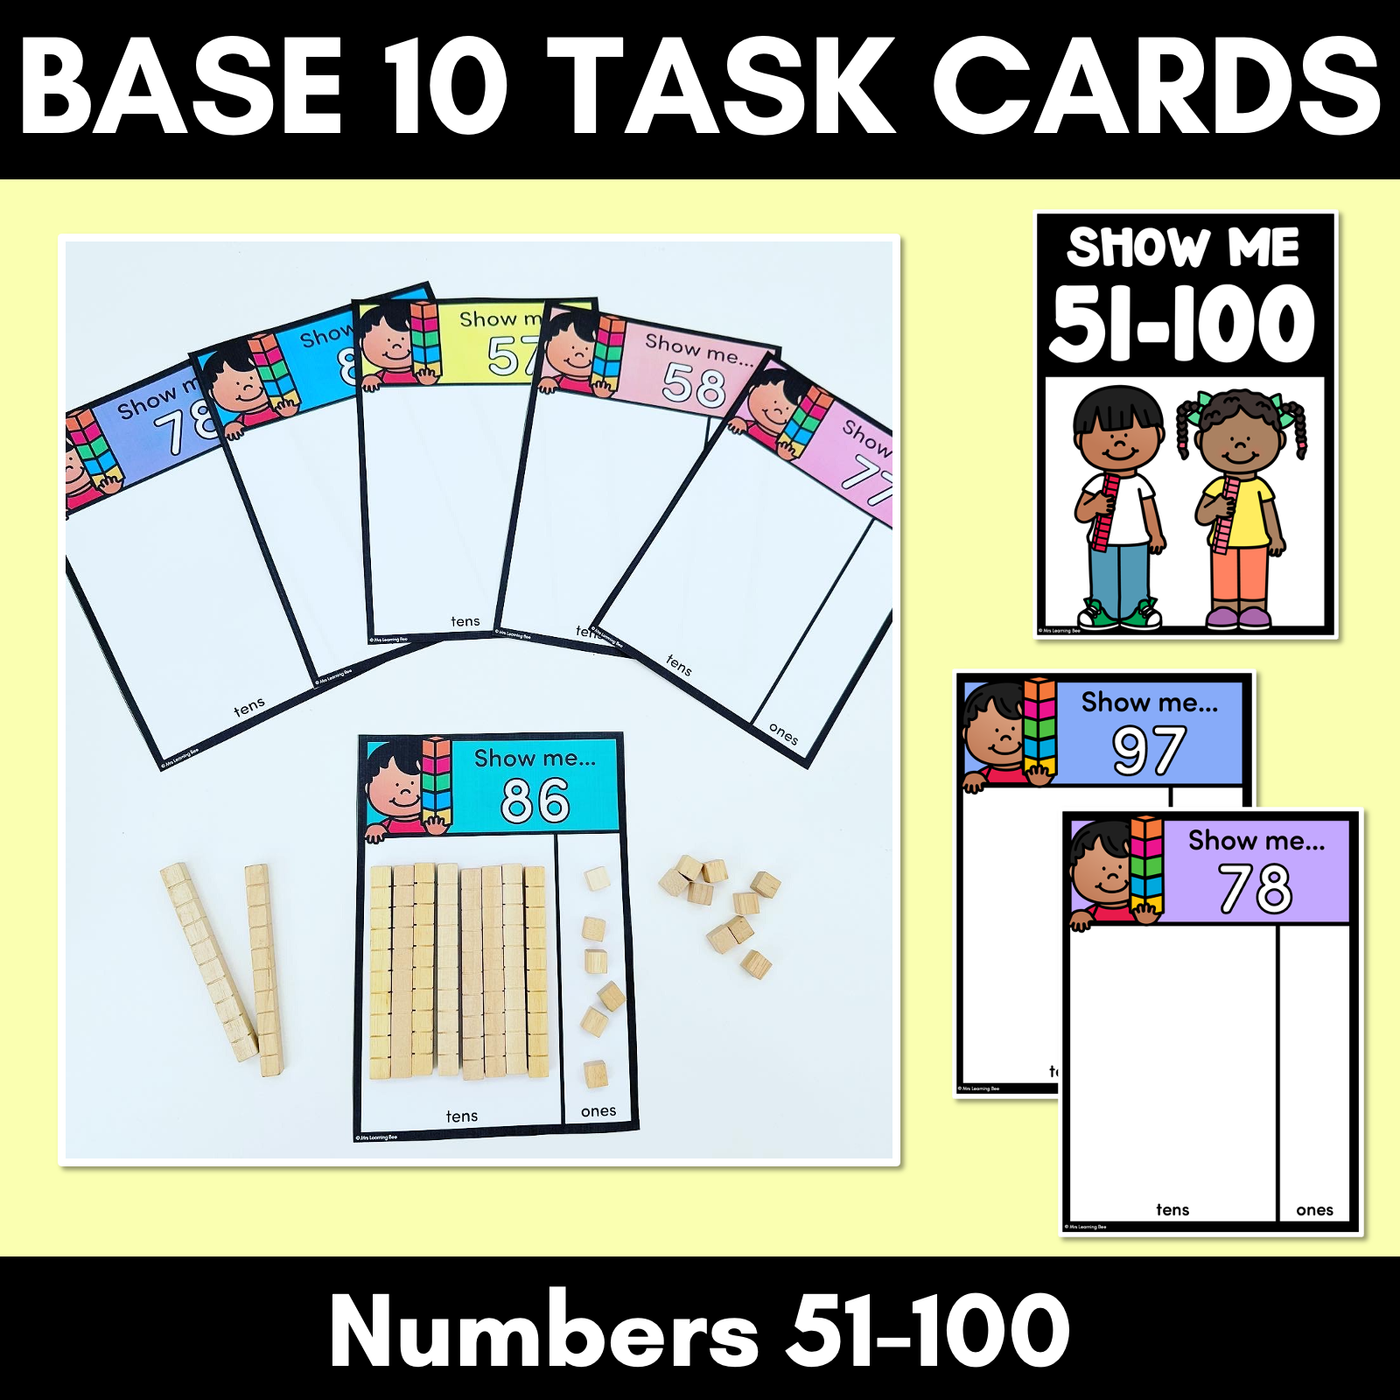 Base Ten Block Task Cards - Show me numbers 51-100 with MAB blocks